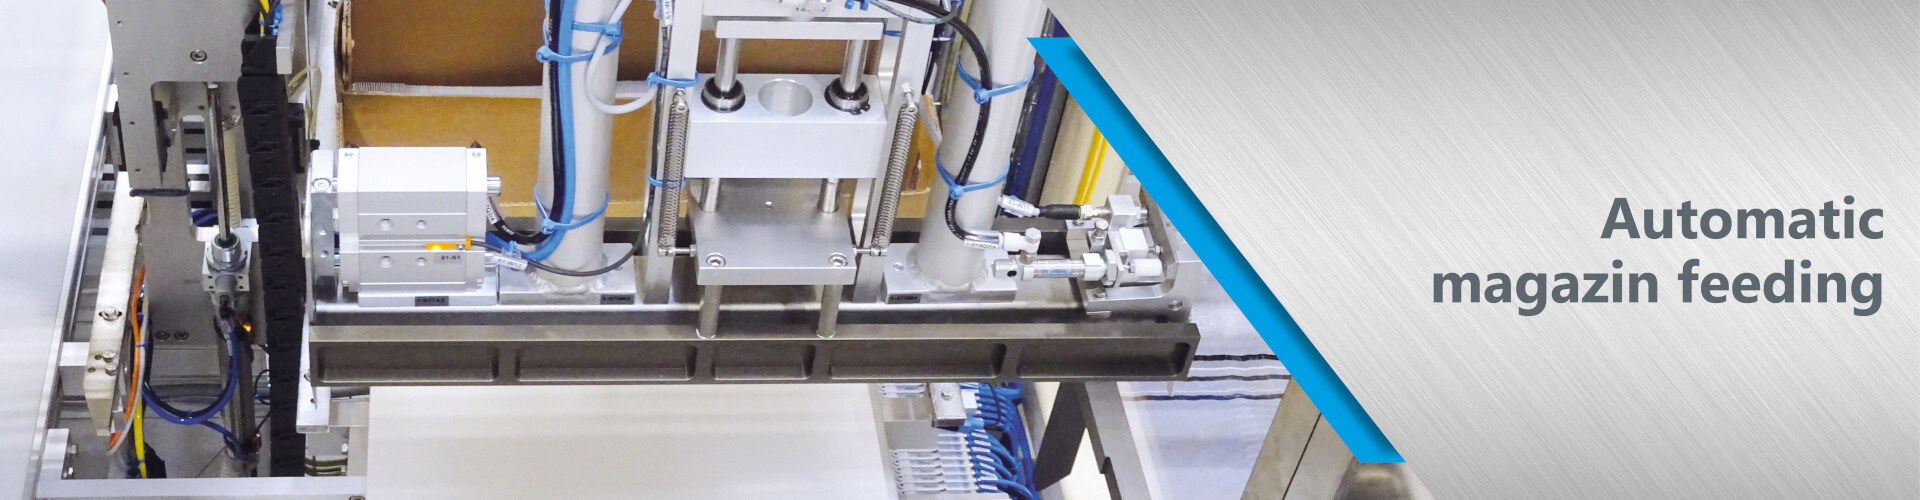 Format-flexible machine for high output ranges for automated loading of folding carton magazines.